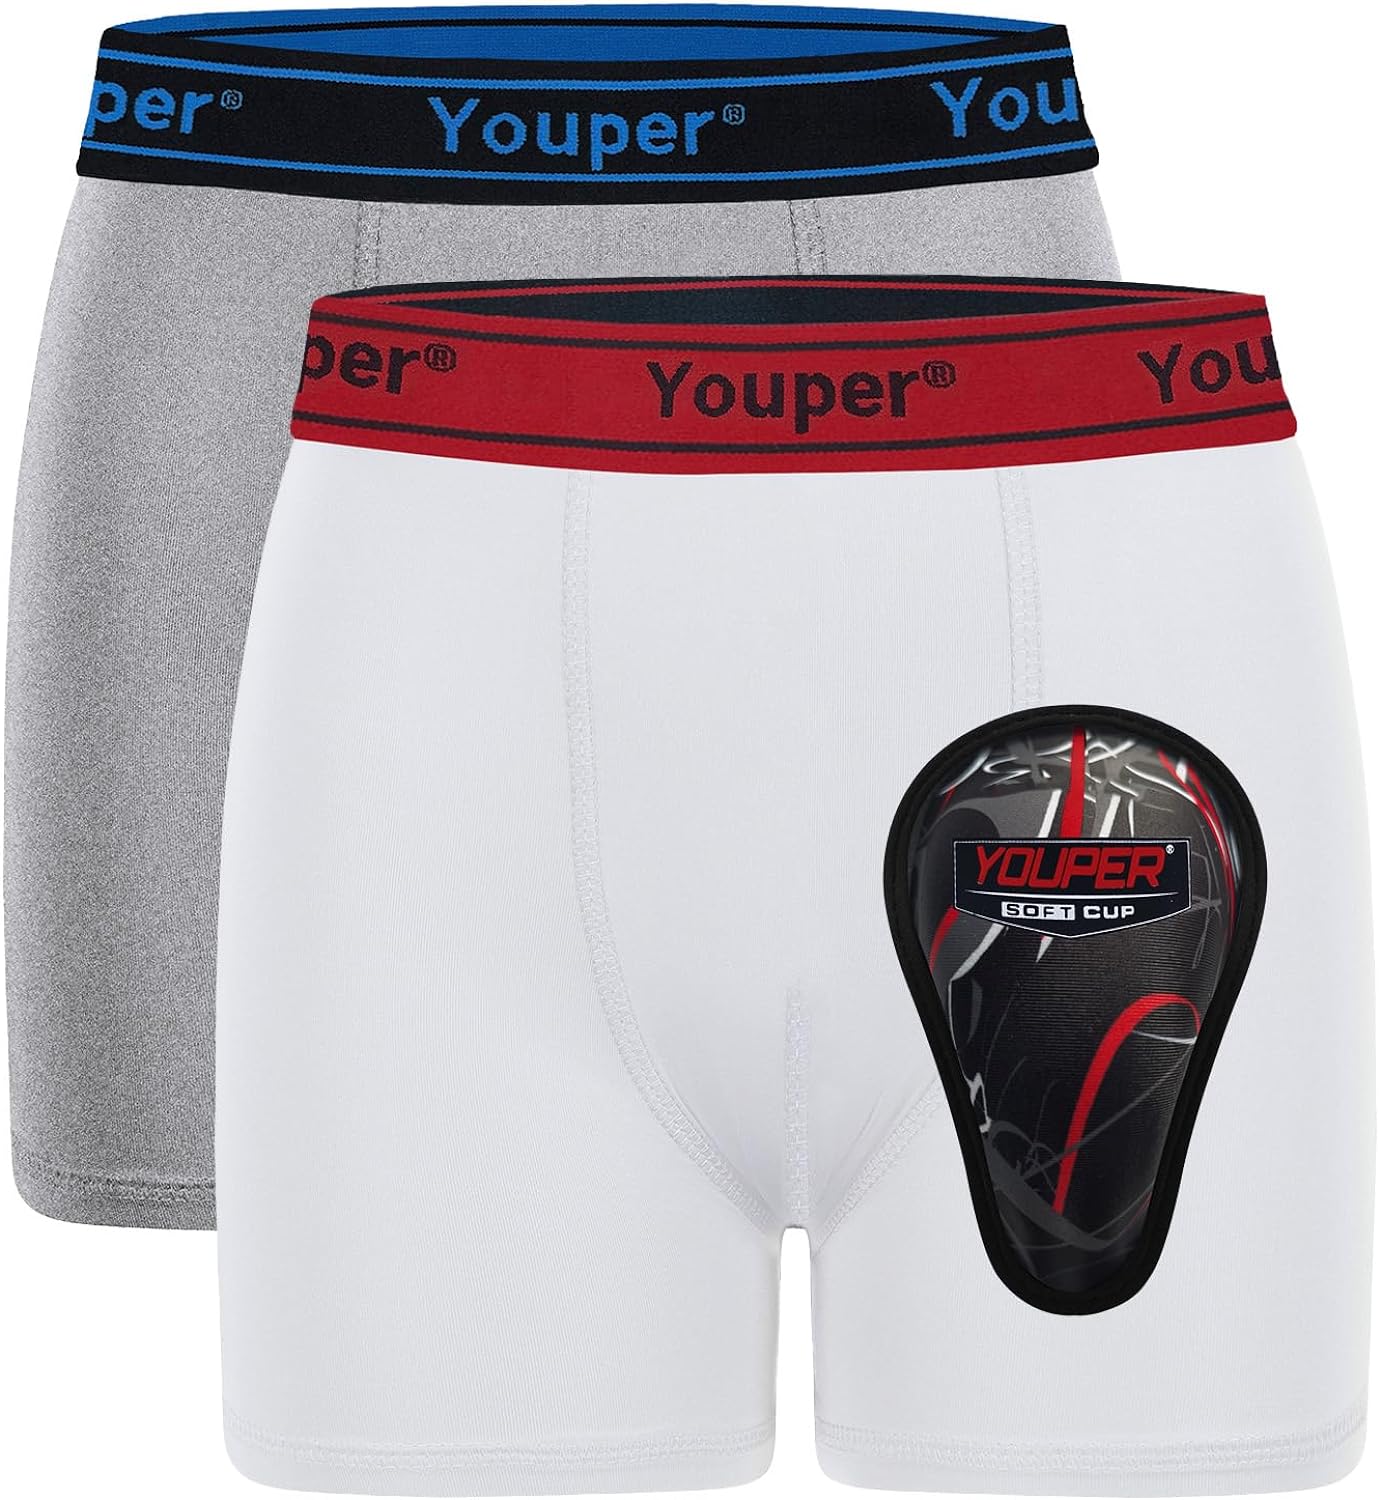 Youth Briefs Boys Compression Underwear with Soft Protective Athletic Cup,  Boxer for Baseball, Football, Lacrosse